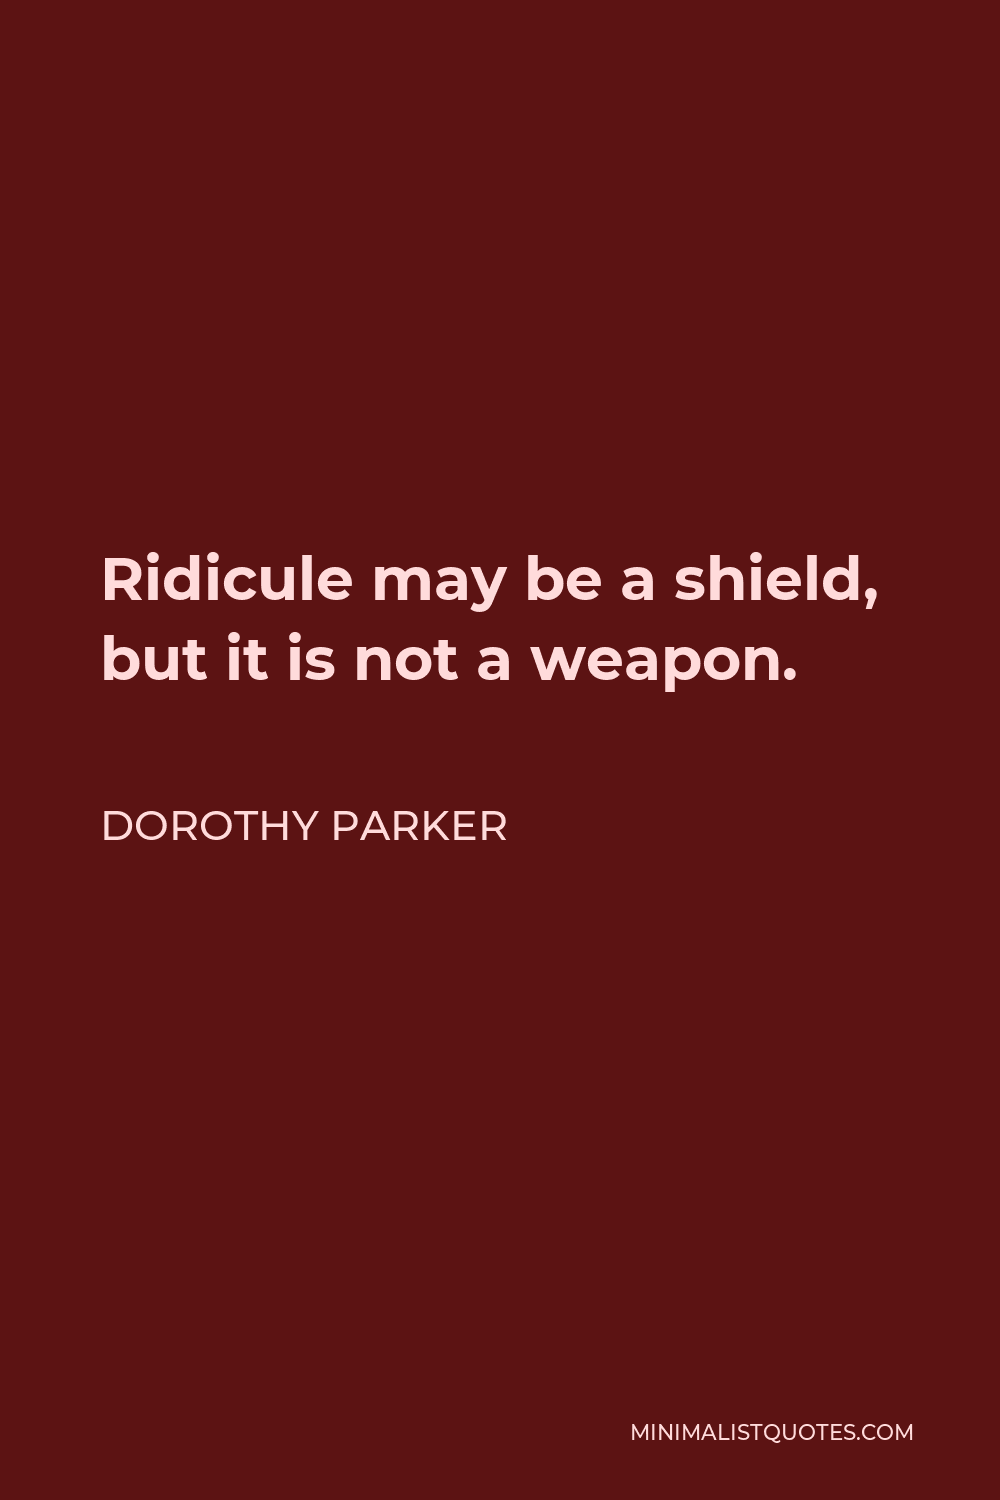 Dorothy Parker Quote - Ridicule may be a shield, but it is not a weapon.